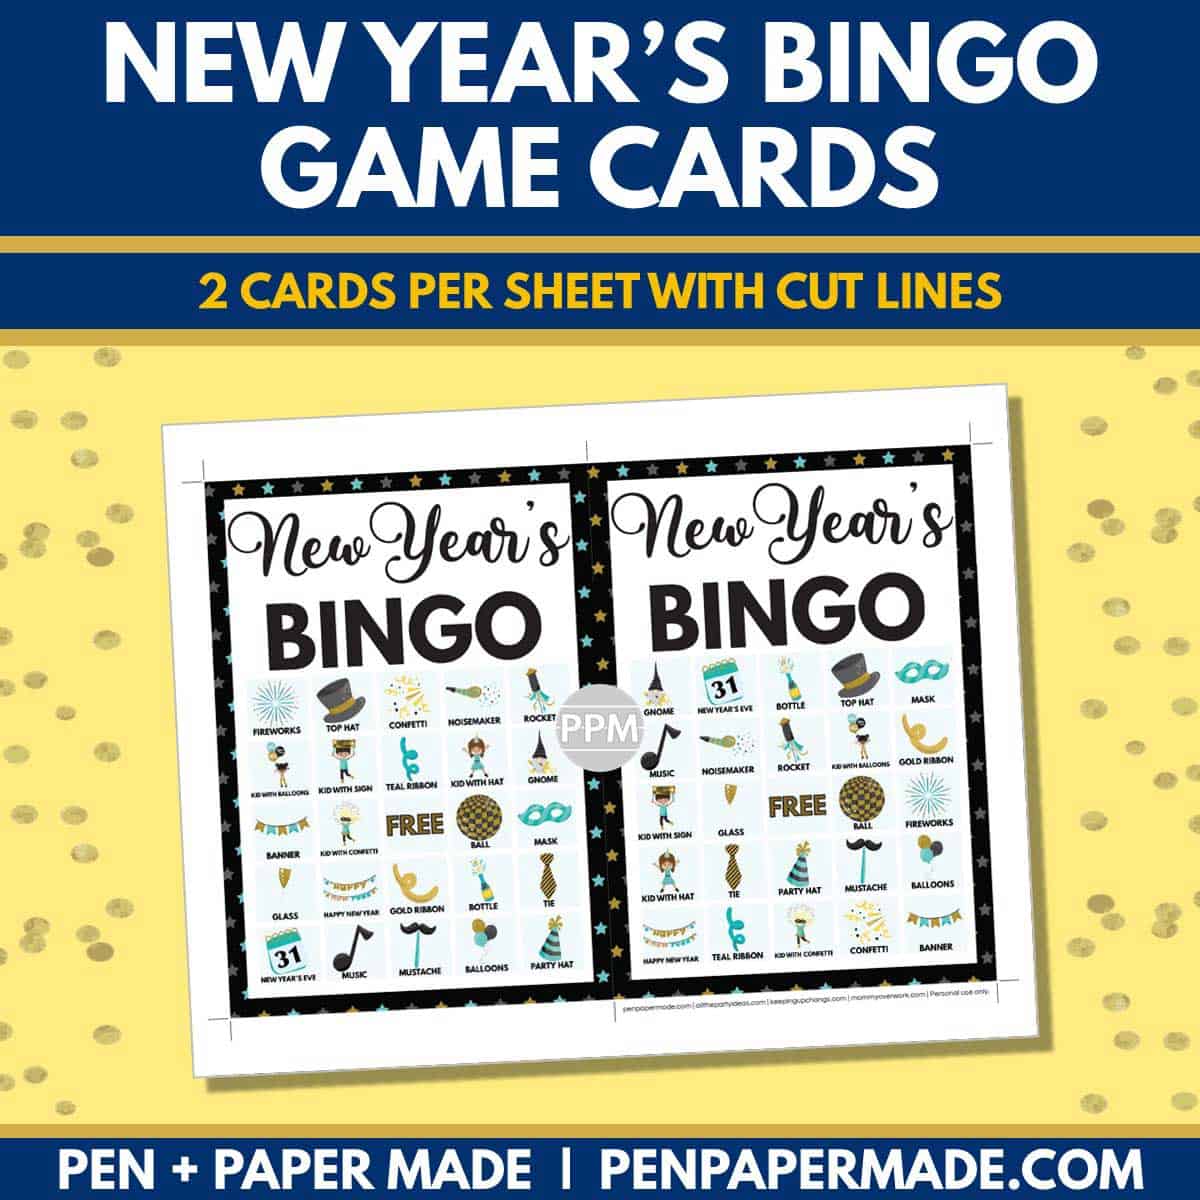 new year's day bingo card 5x5 5x7 game boards with images and text words.